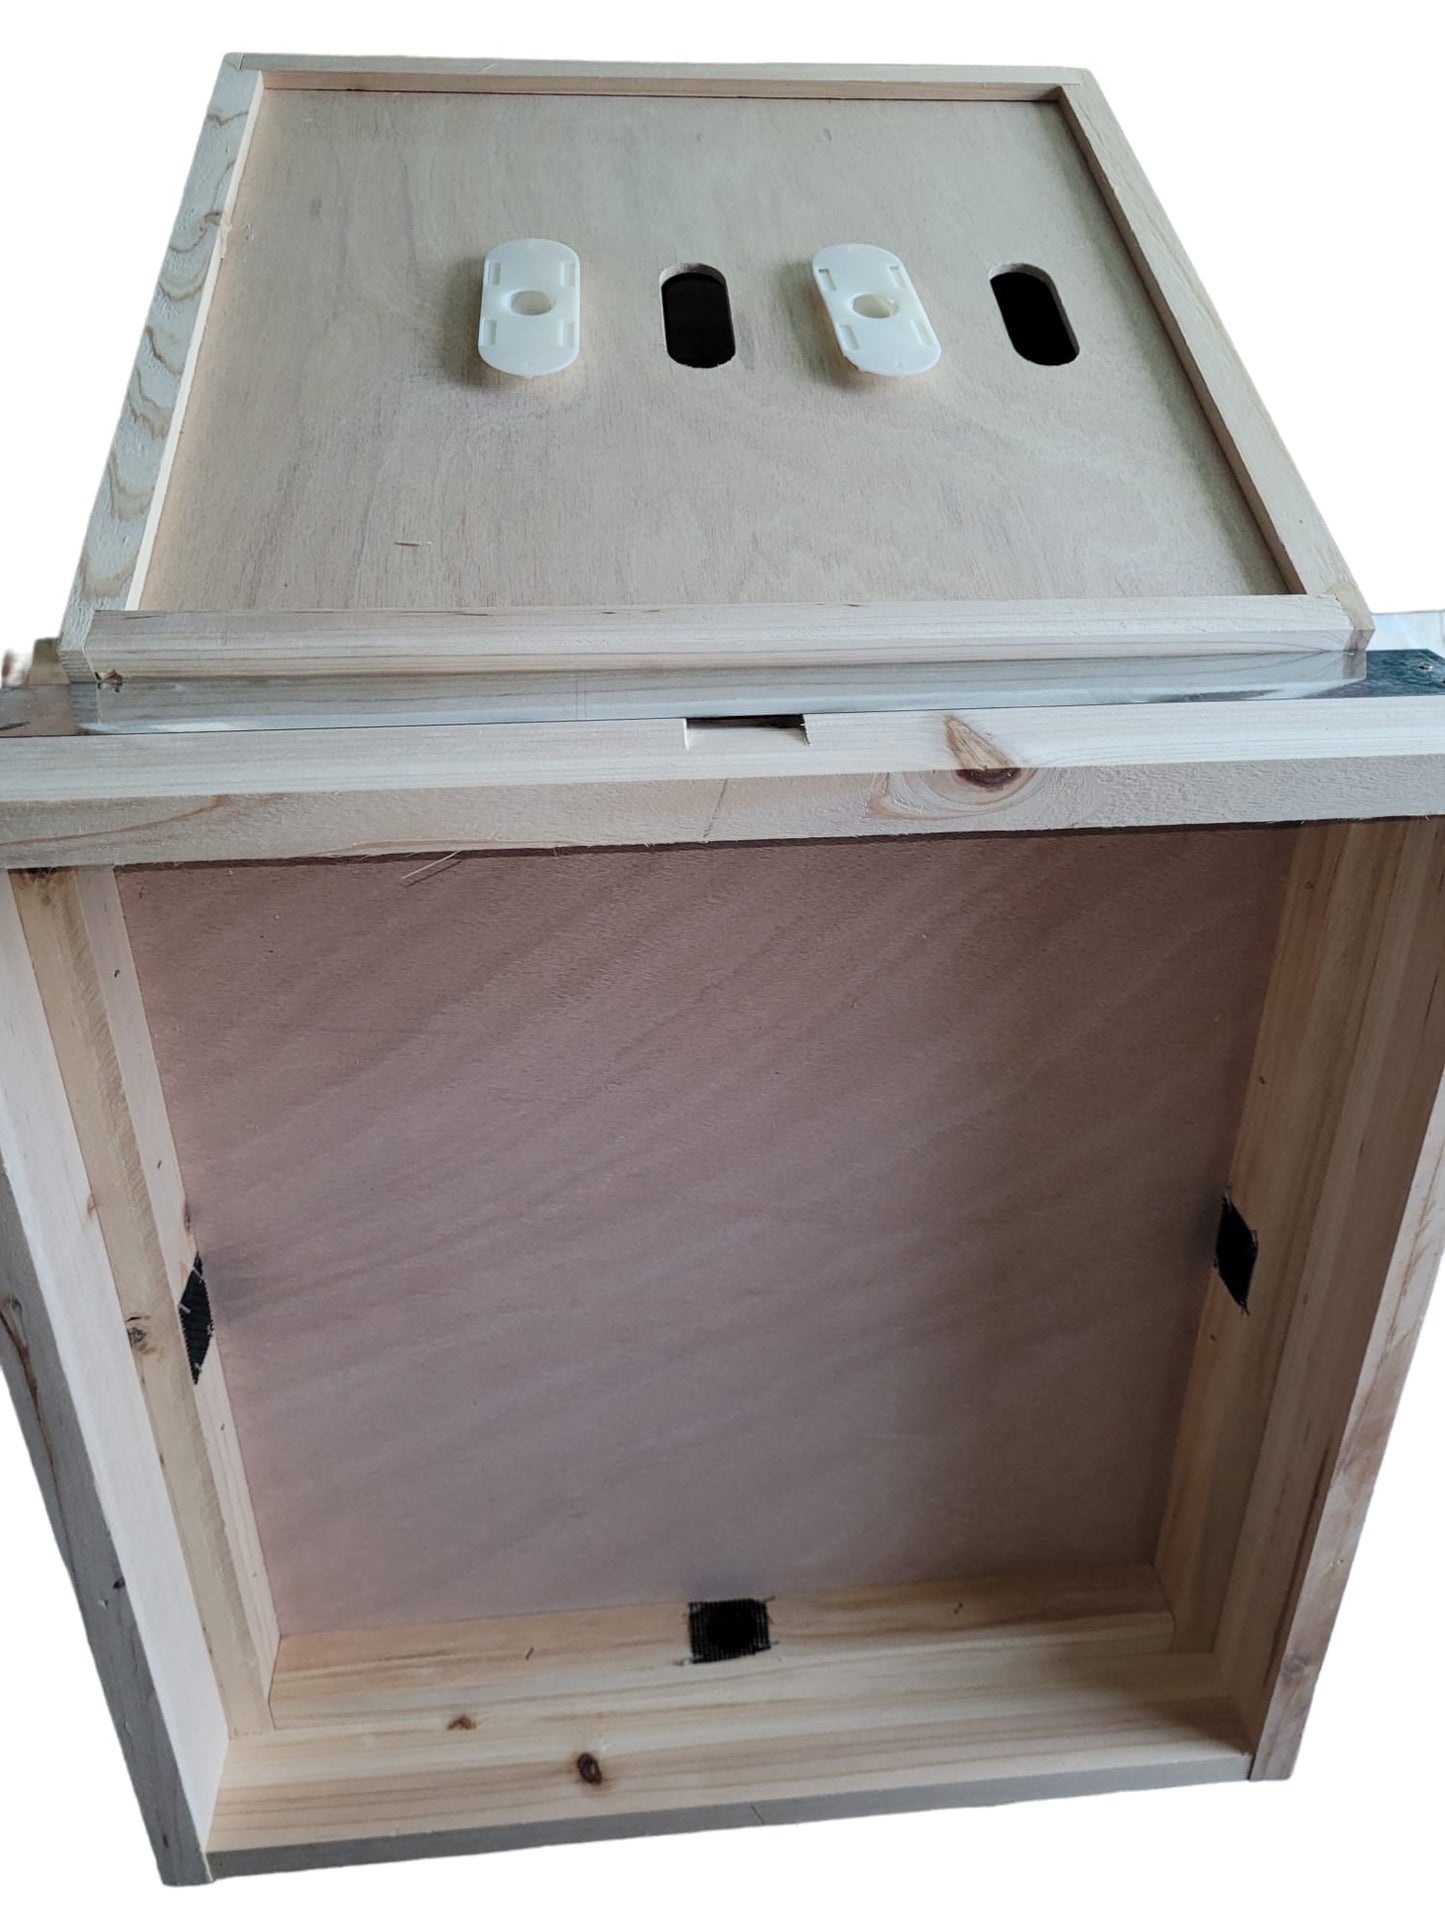 National Beehive Fully Assembled - Donagh Bees